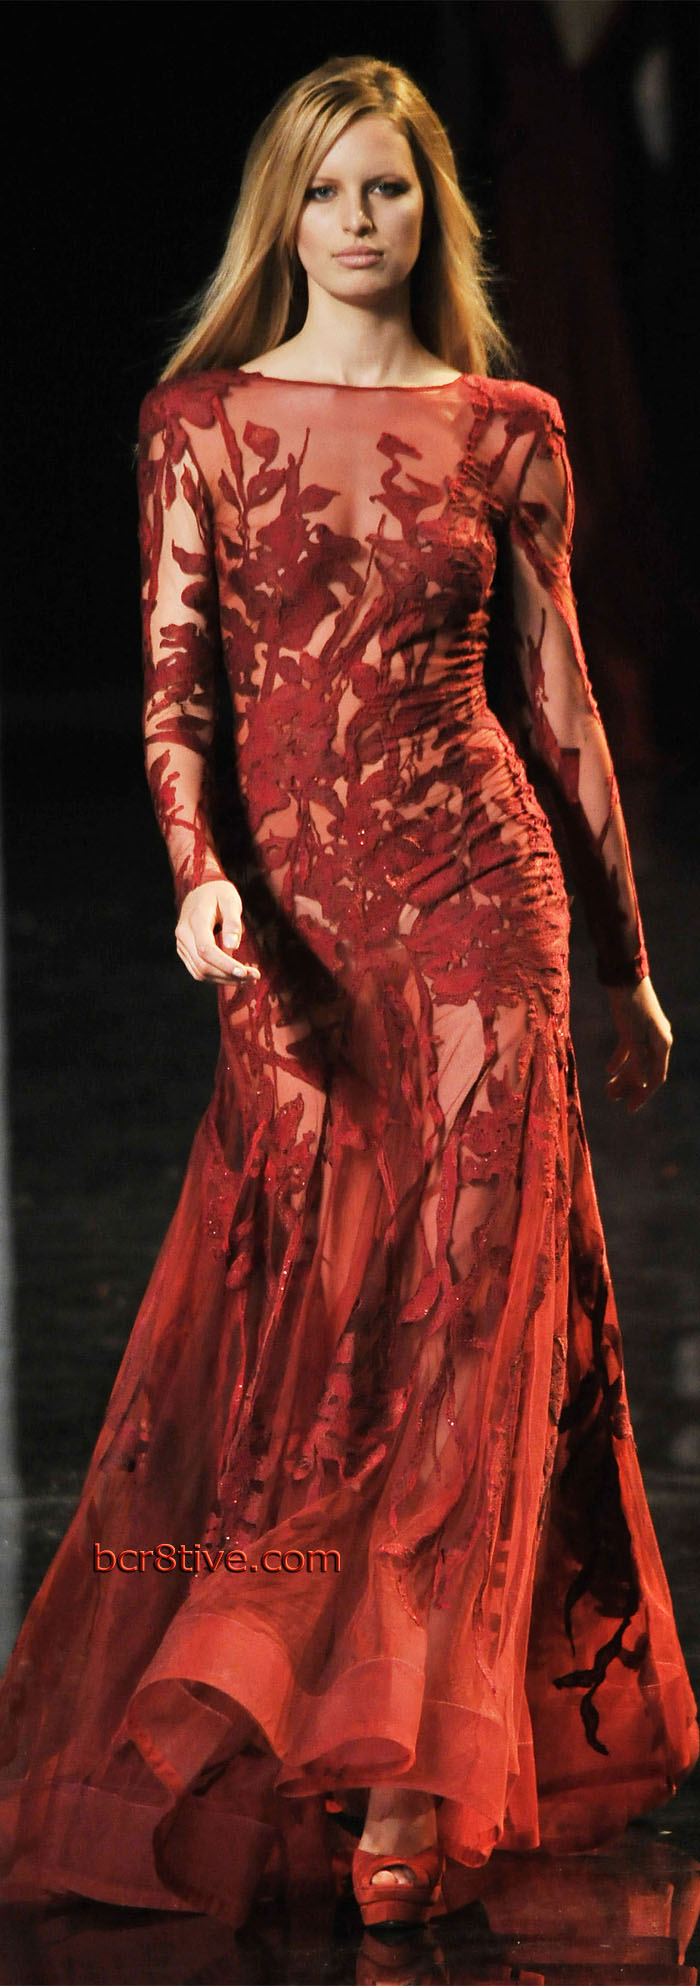 Elie Saab Haute Couture Fall Winter 2010 - 2011